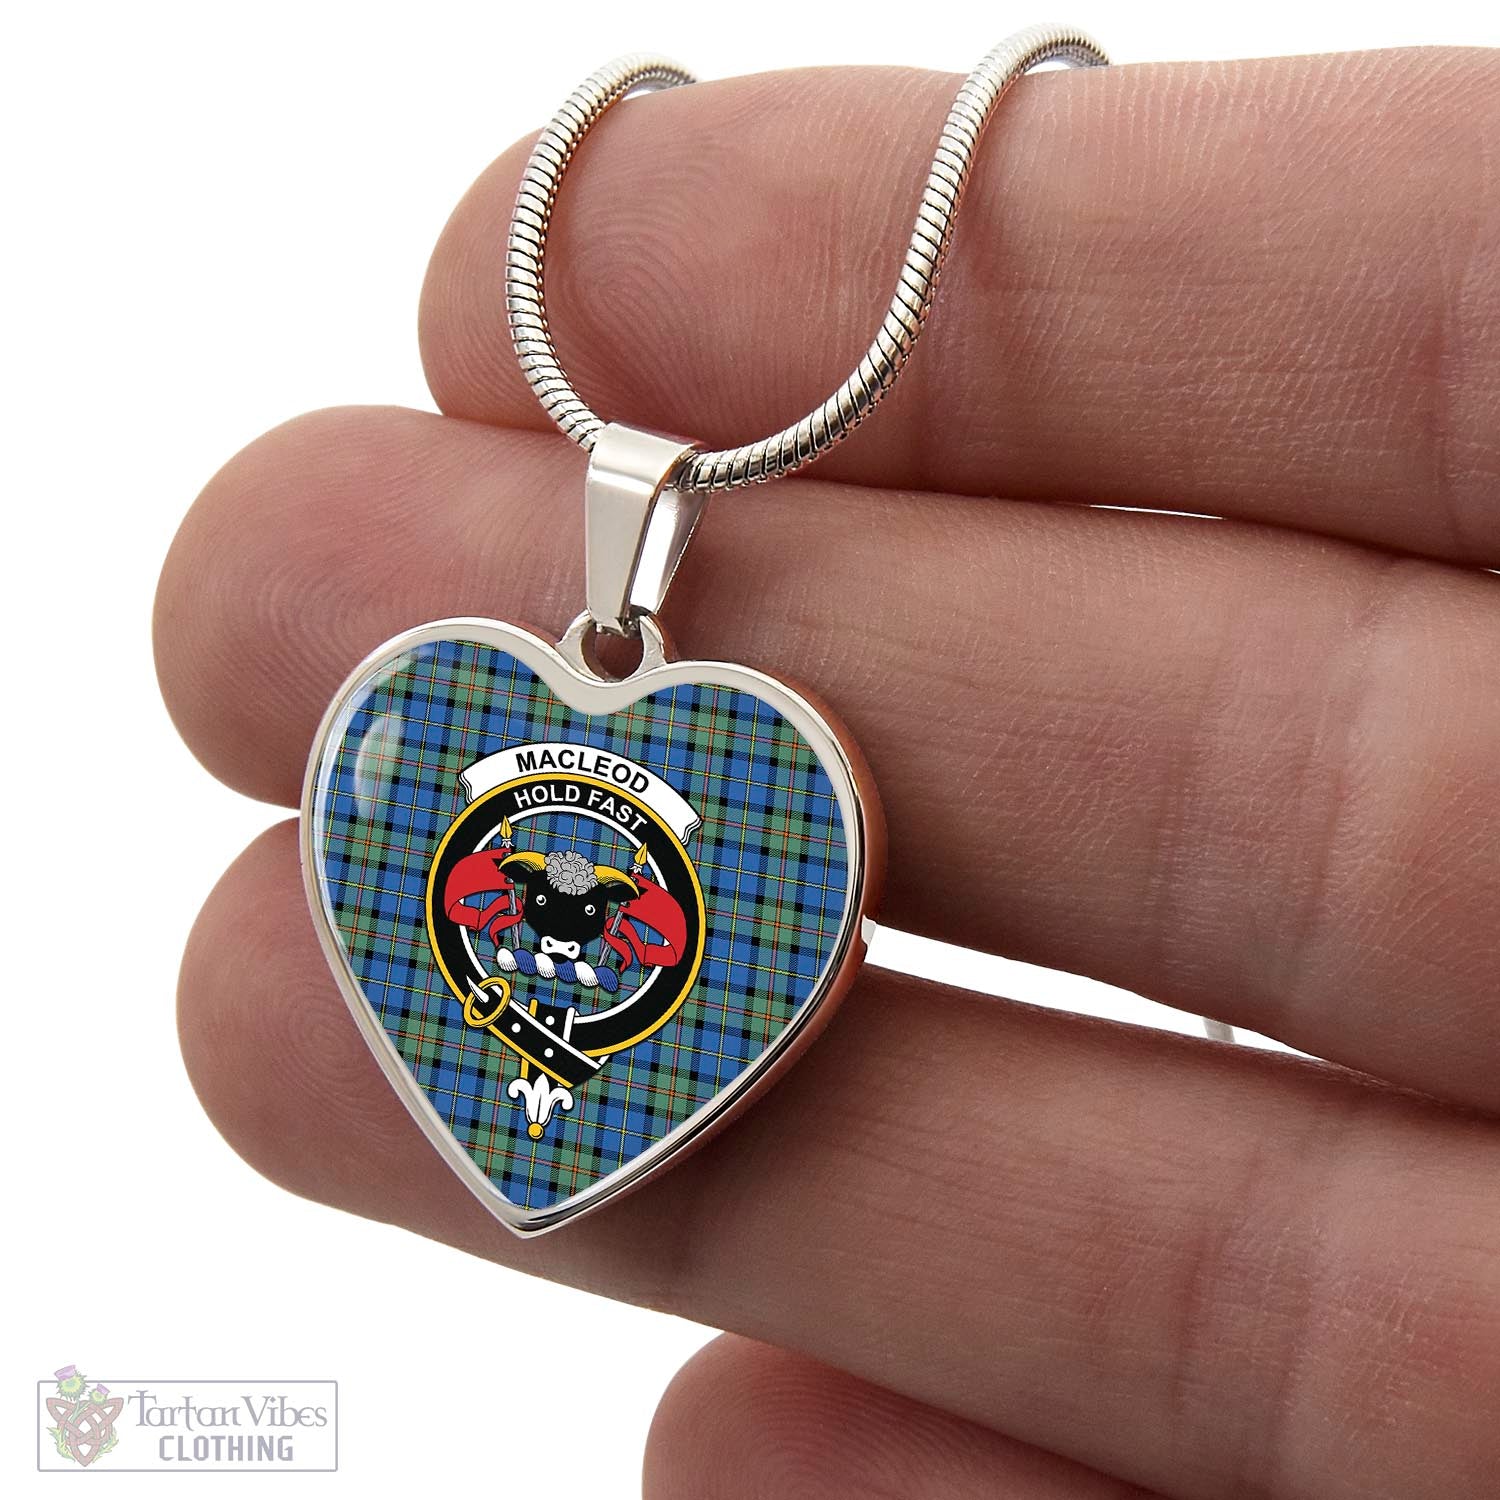 Tartan Vibes Clothing MacLeod of Harris Ancient Tartan Heart Necklace with Family Crest